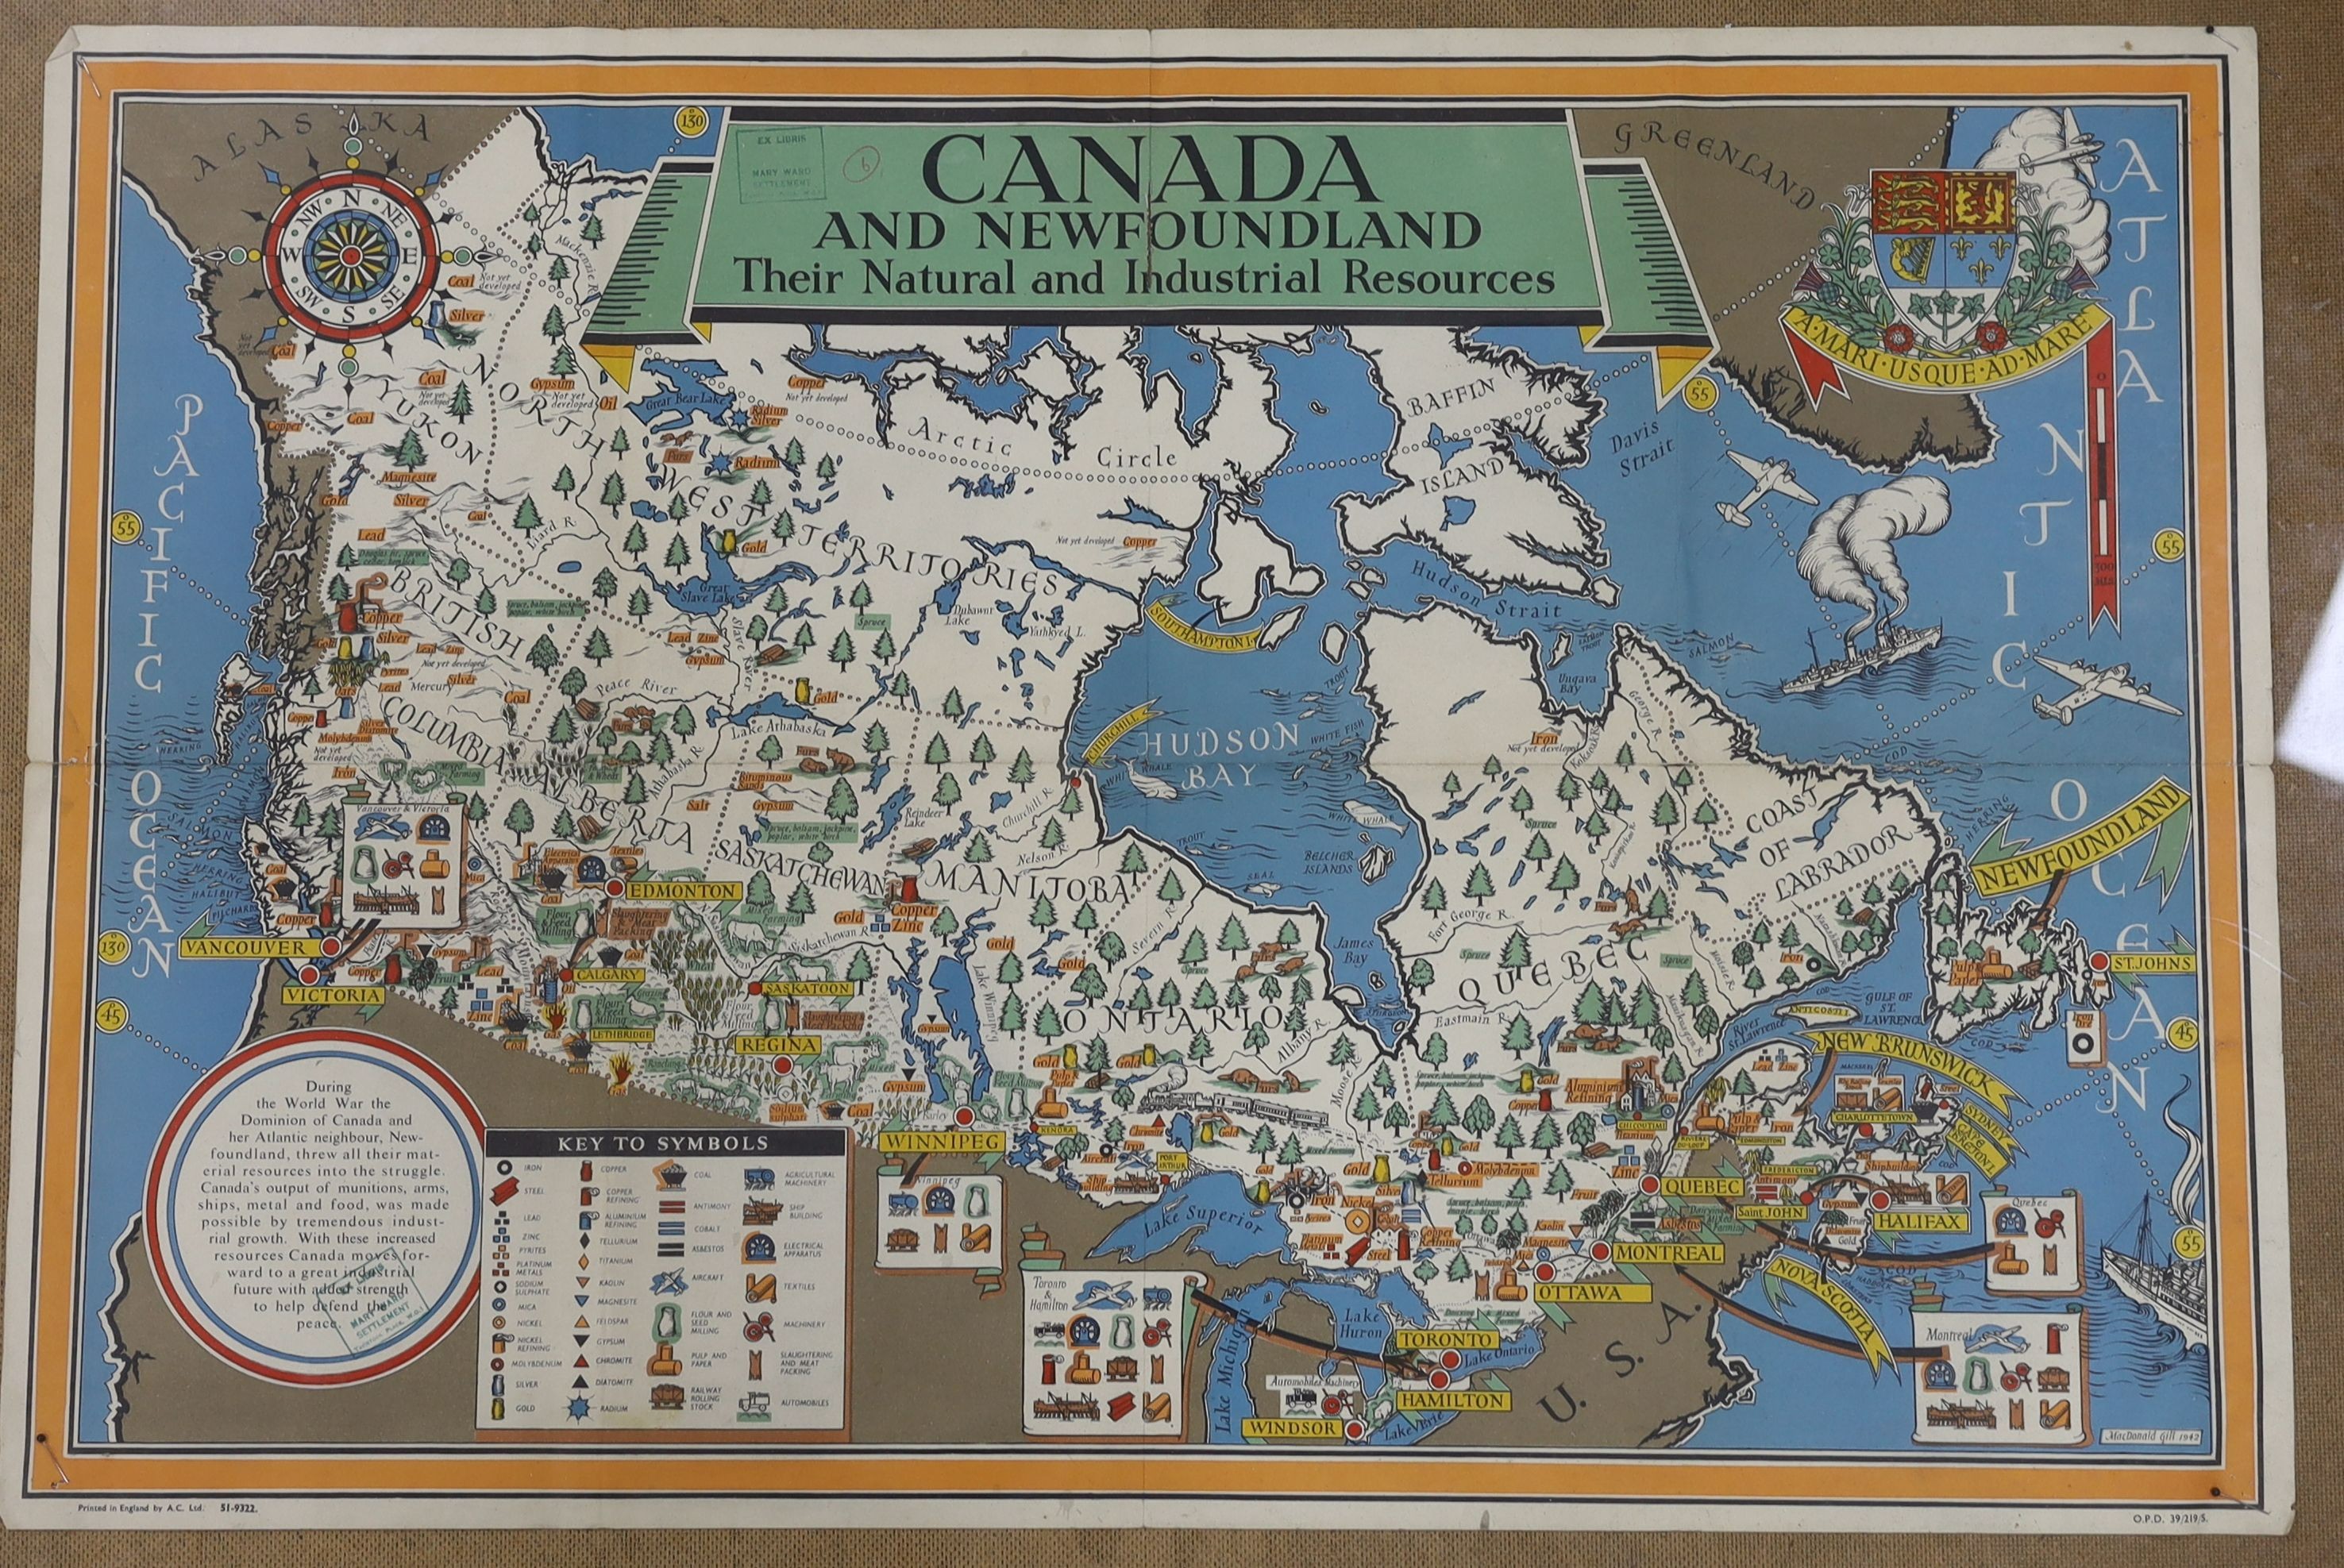 Macdonald Gill (1884-1947), A.C. Limited colour print, Poster of Canada and Newfoundland, their natural and industrial resources 1942, 51 x 75cm